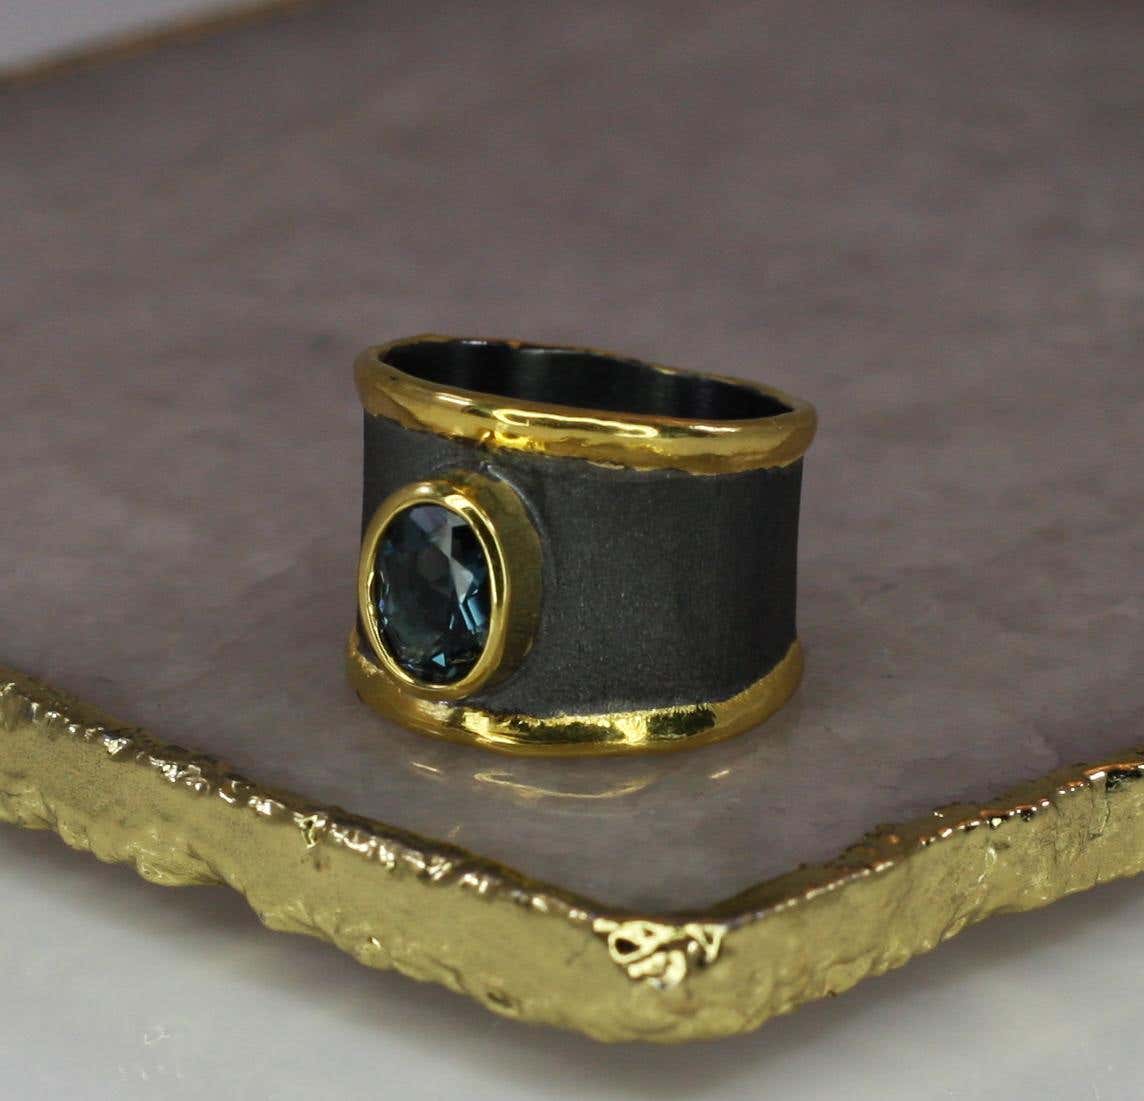 Eclyps Fine Silver and Gold Two-Tone Ring with Aquamarine and Diamond